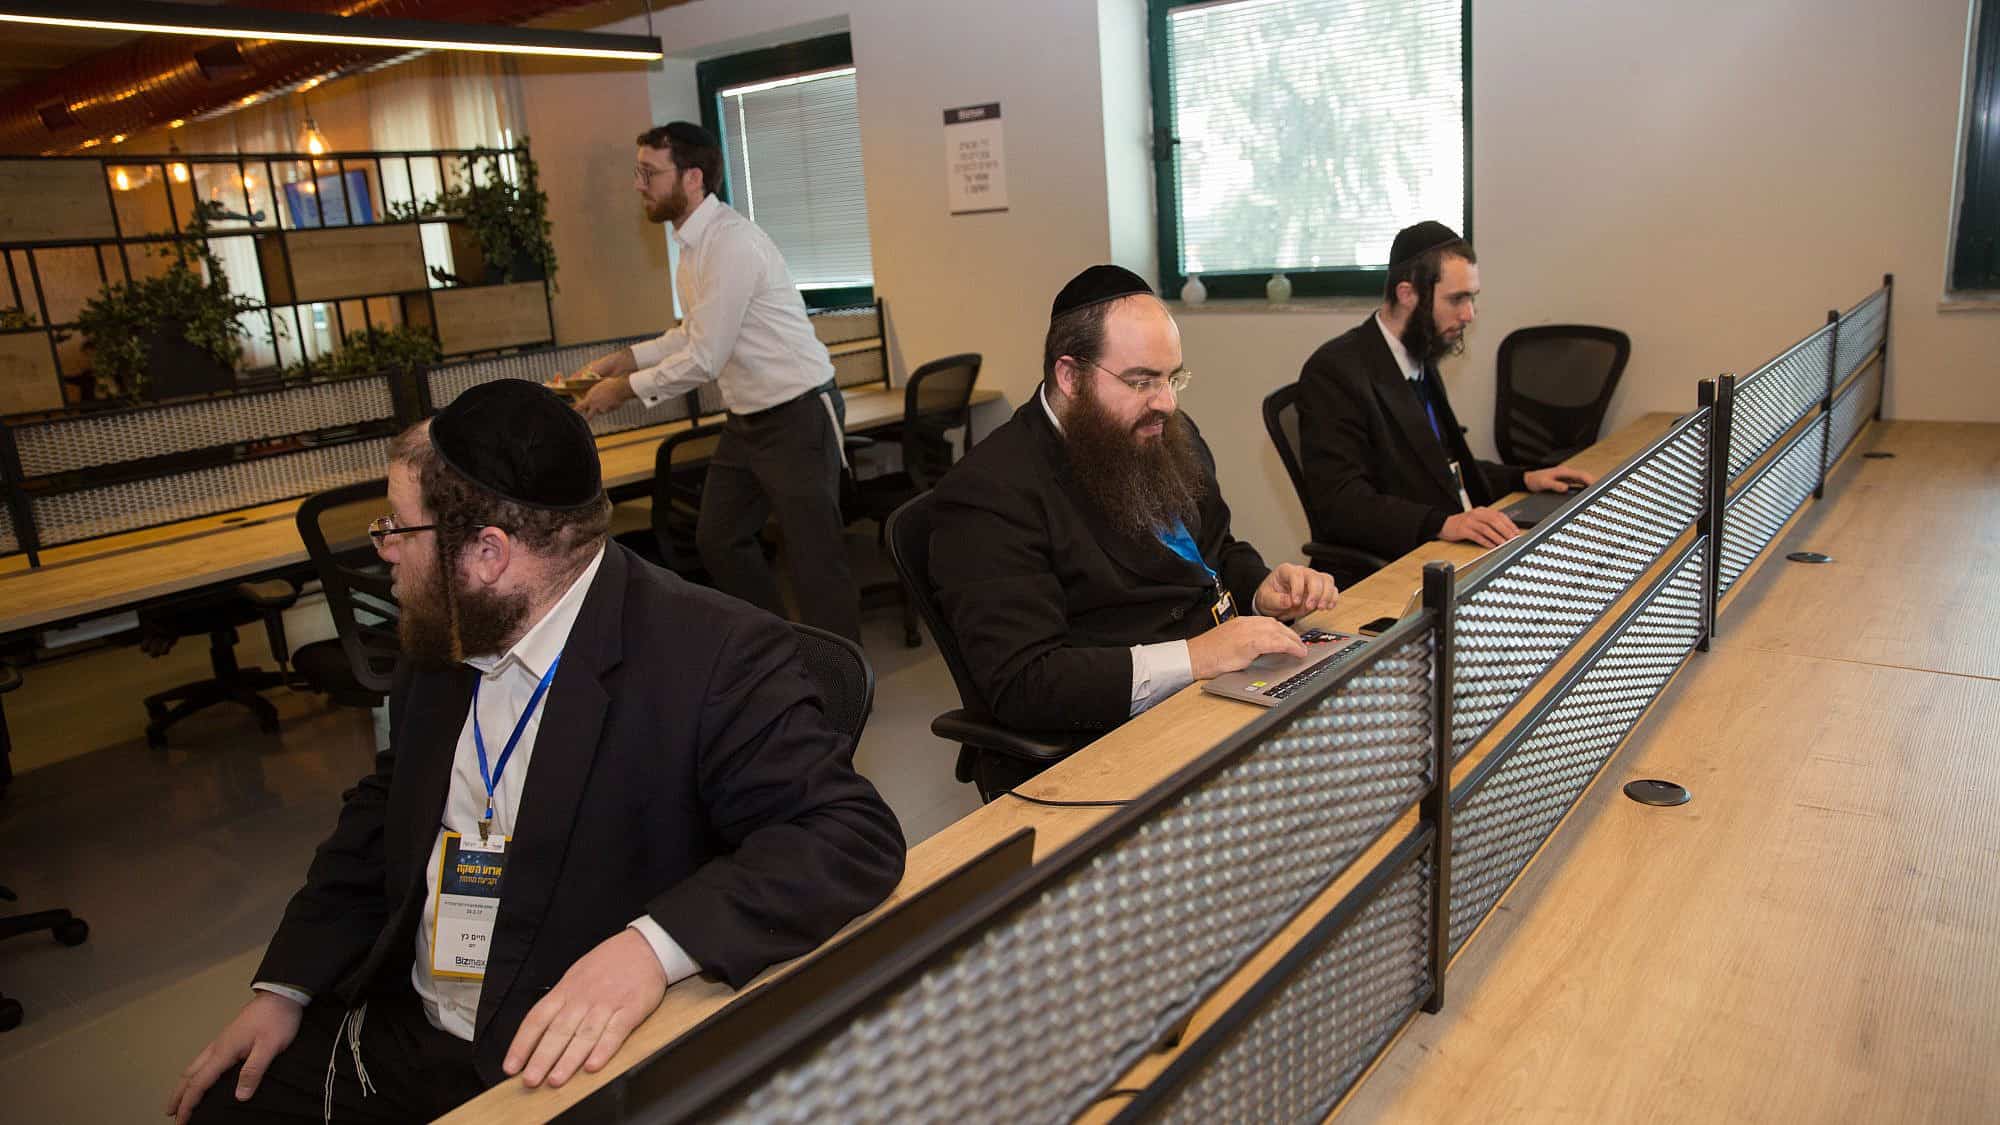 Ultra-Orthodox men work at the Bizmax Innovative Business Complex in Jerusalem, which endeavors to integrate Haredi men into various careers, Feb. 23, 2017. Credit: Flash90.